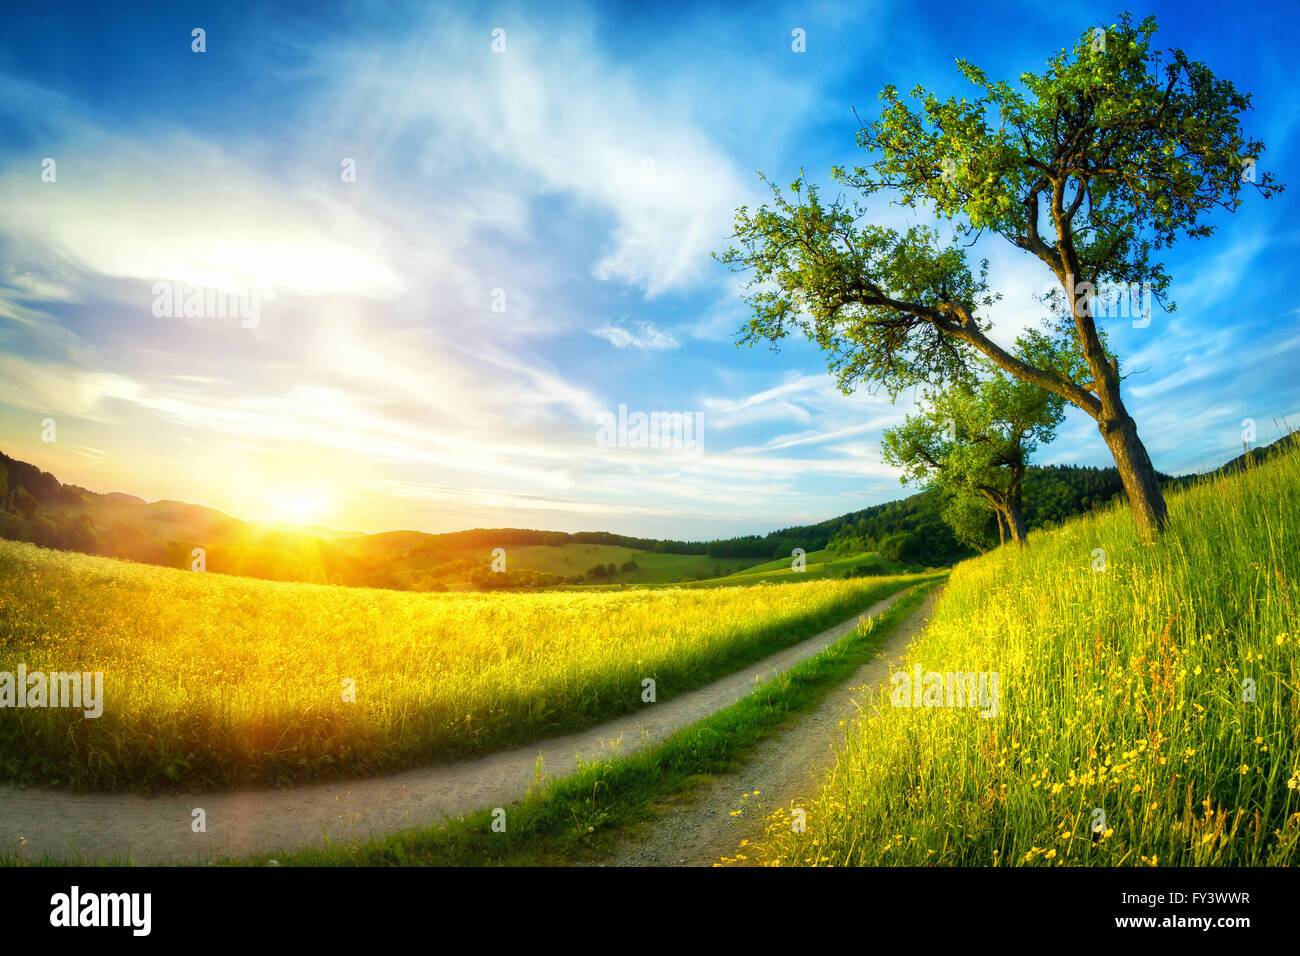 Idyllic rural landscape with meadows. blue sky, a tree and a path leading to the horizon at sunset Stock Photo